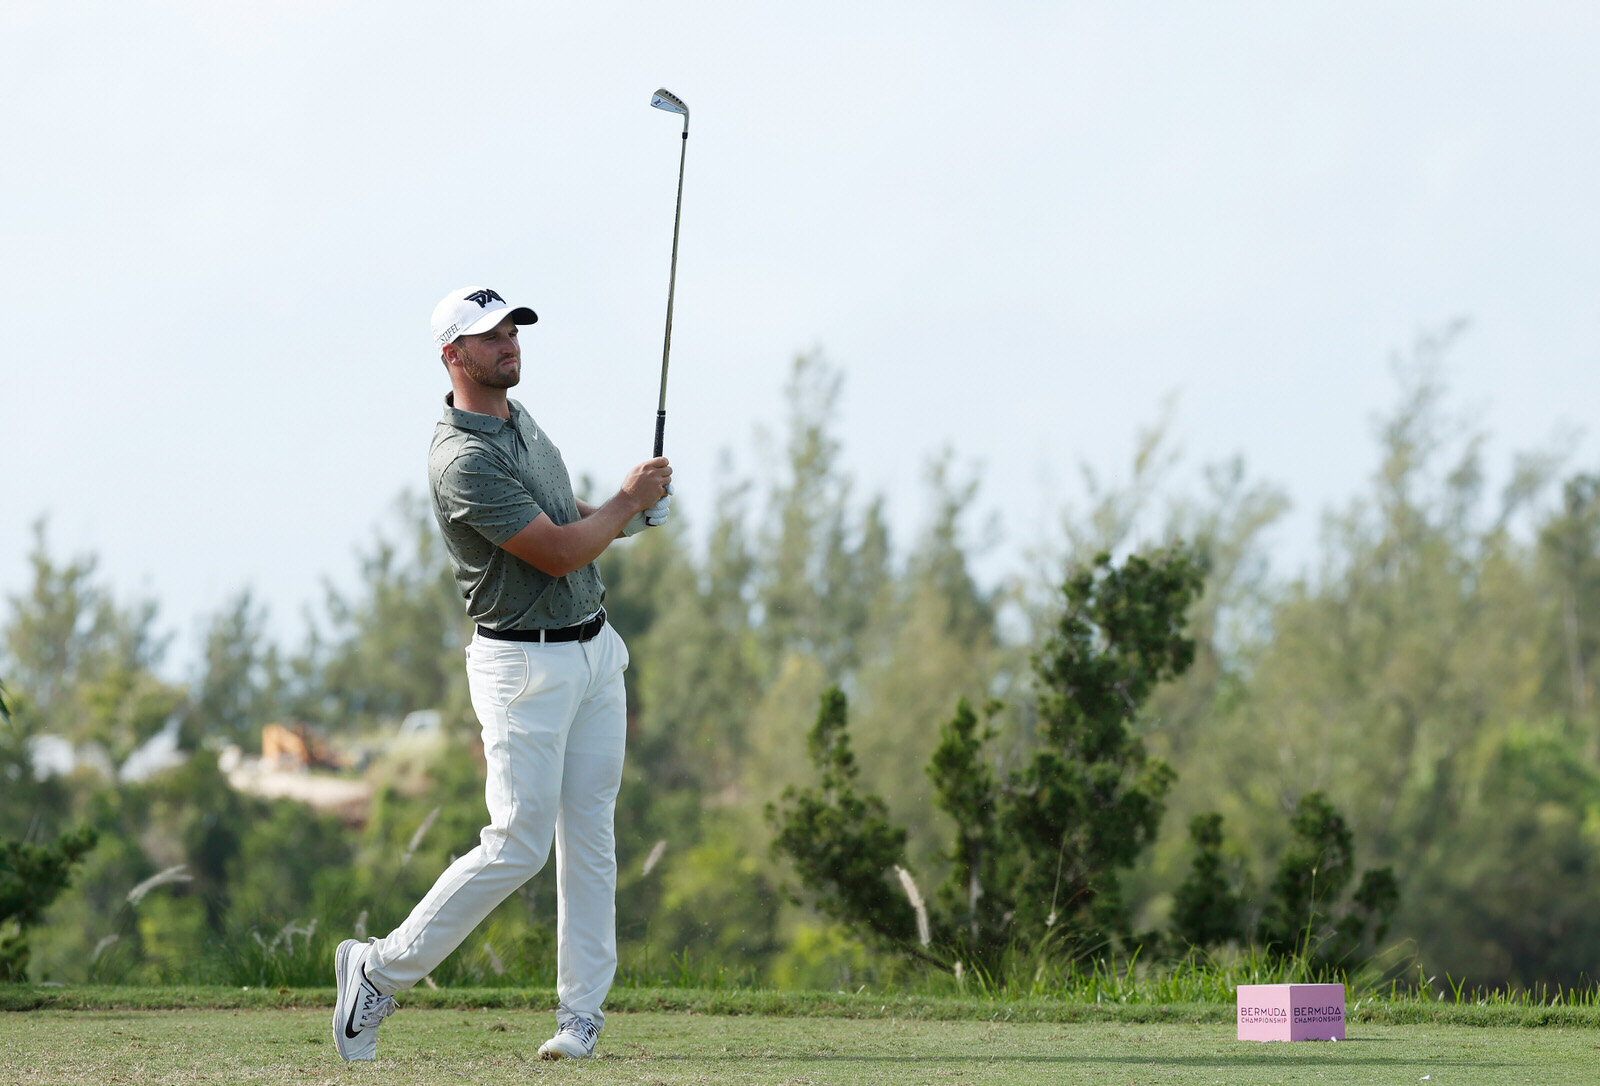  SOUTHAMPTON, BERMUDA - OCTOBER 30: Wyndham Clark of the United States plays his shot from the first tee during the second round of the Bermuda Championship at Port Royal Golf Course on October 30, 2020 in Southampton, Bermuda. (Photo by Gregory Sham